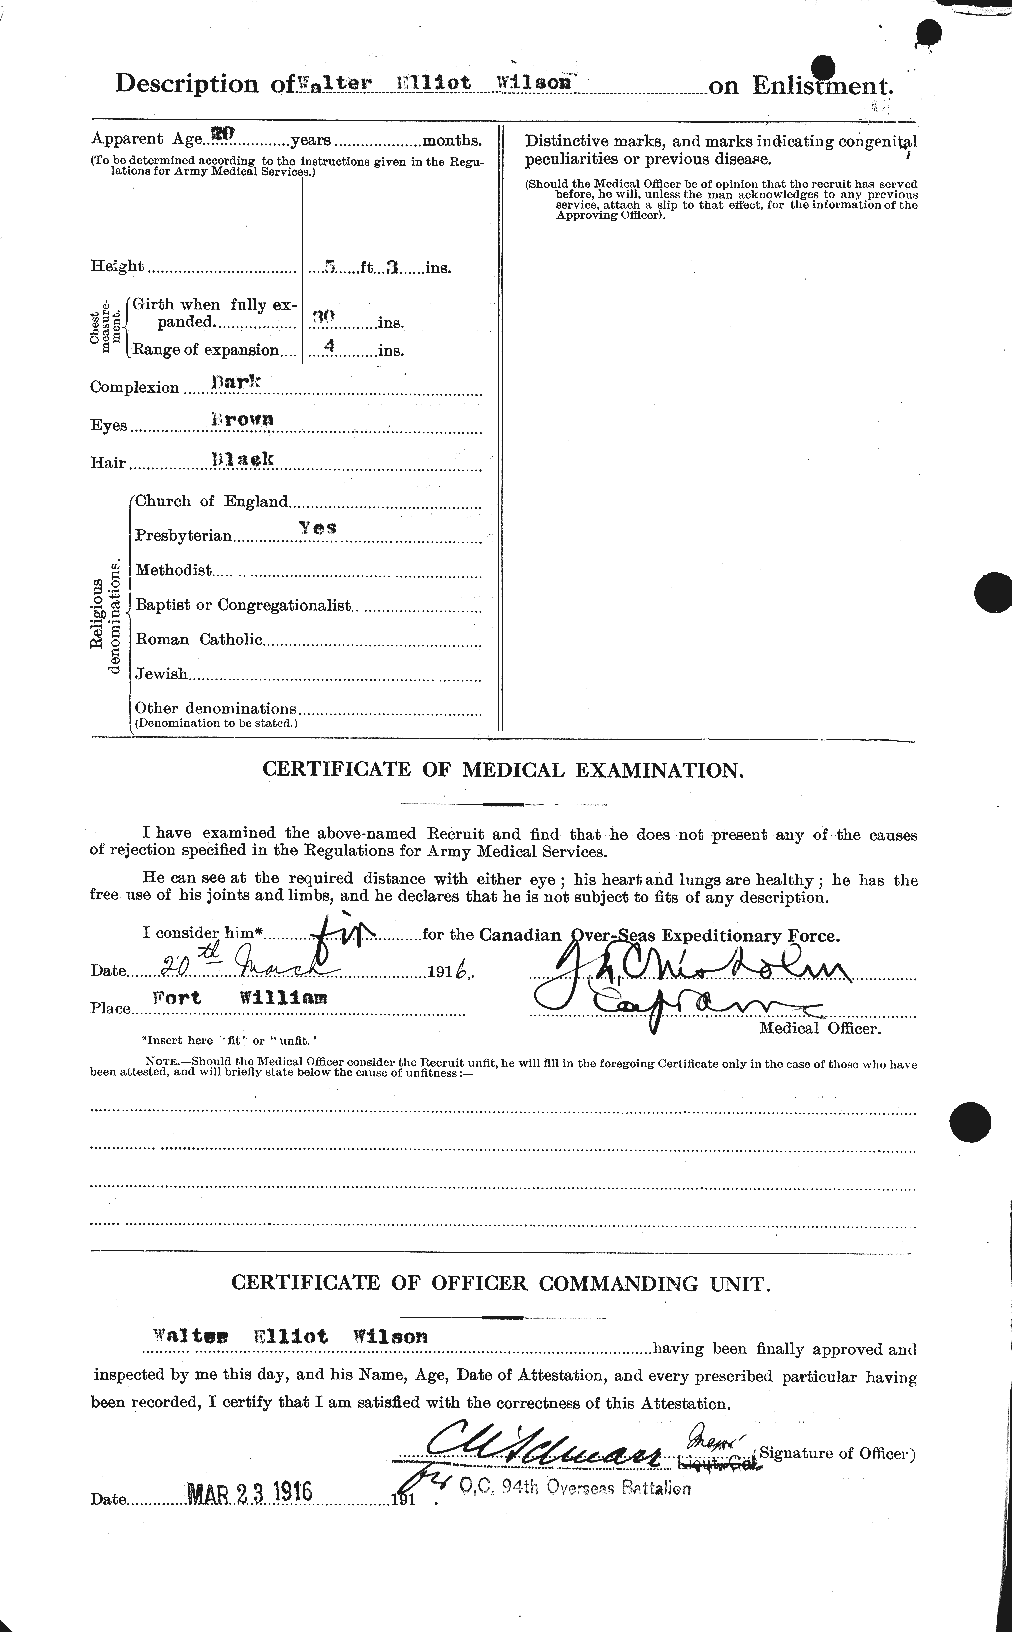 Personnel Records of the First World War - CEF 681751b